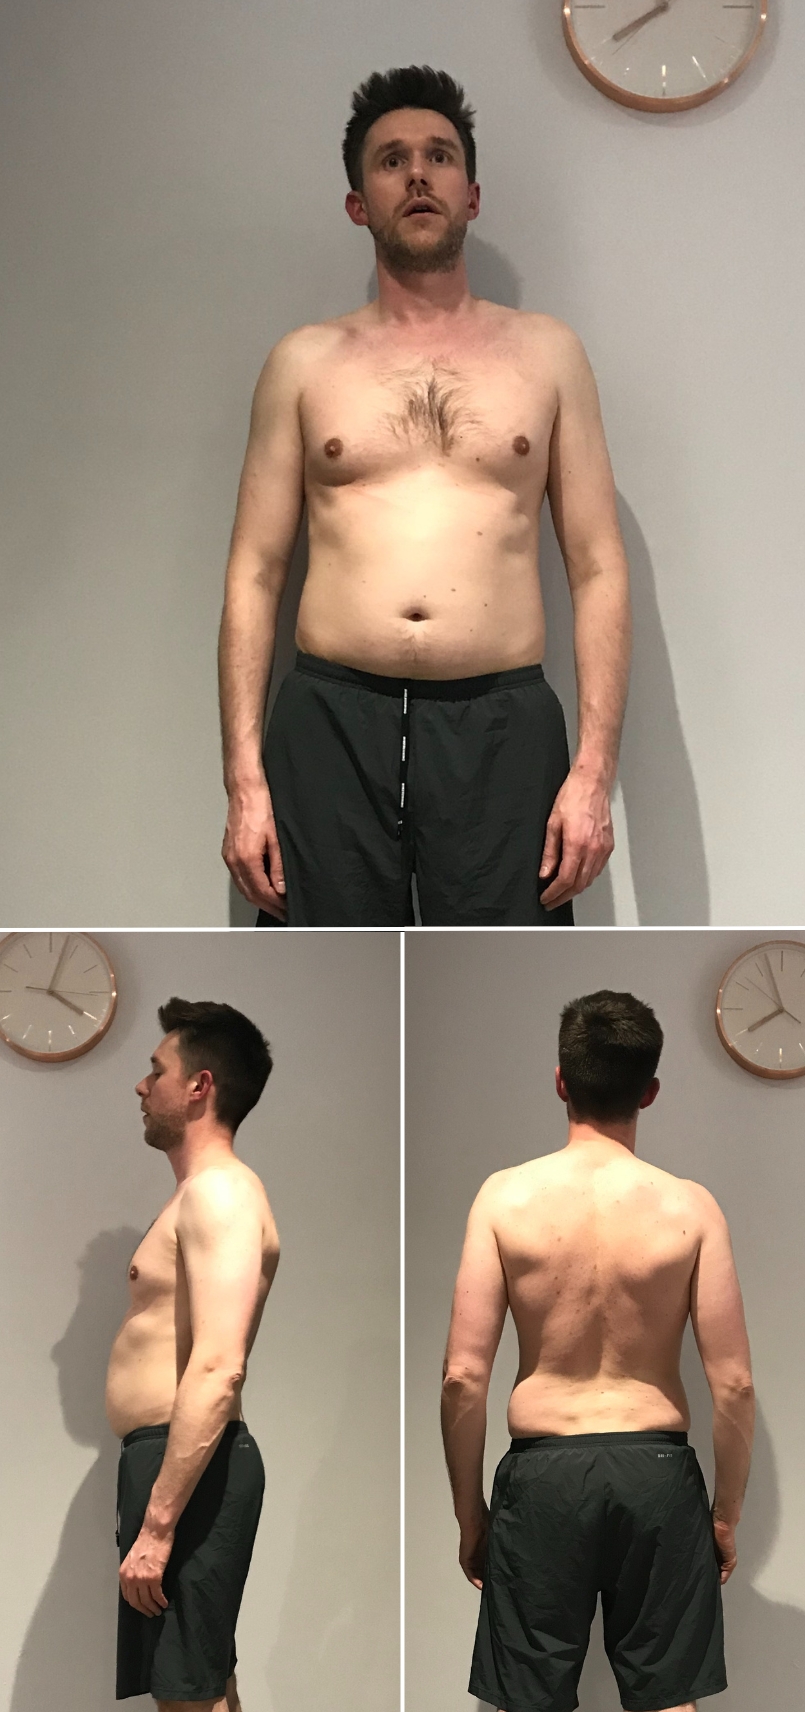 Mike's before personal training transformation pictures